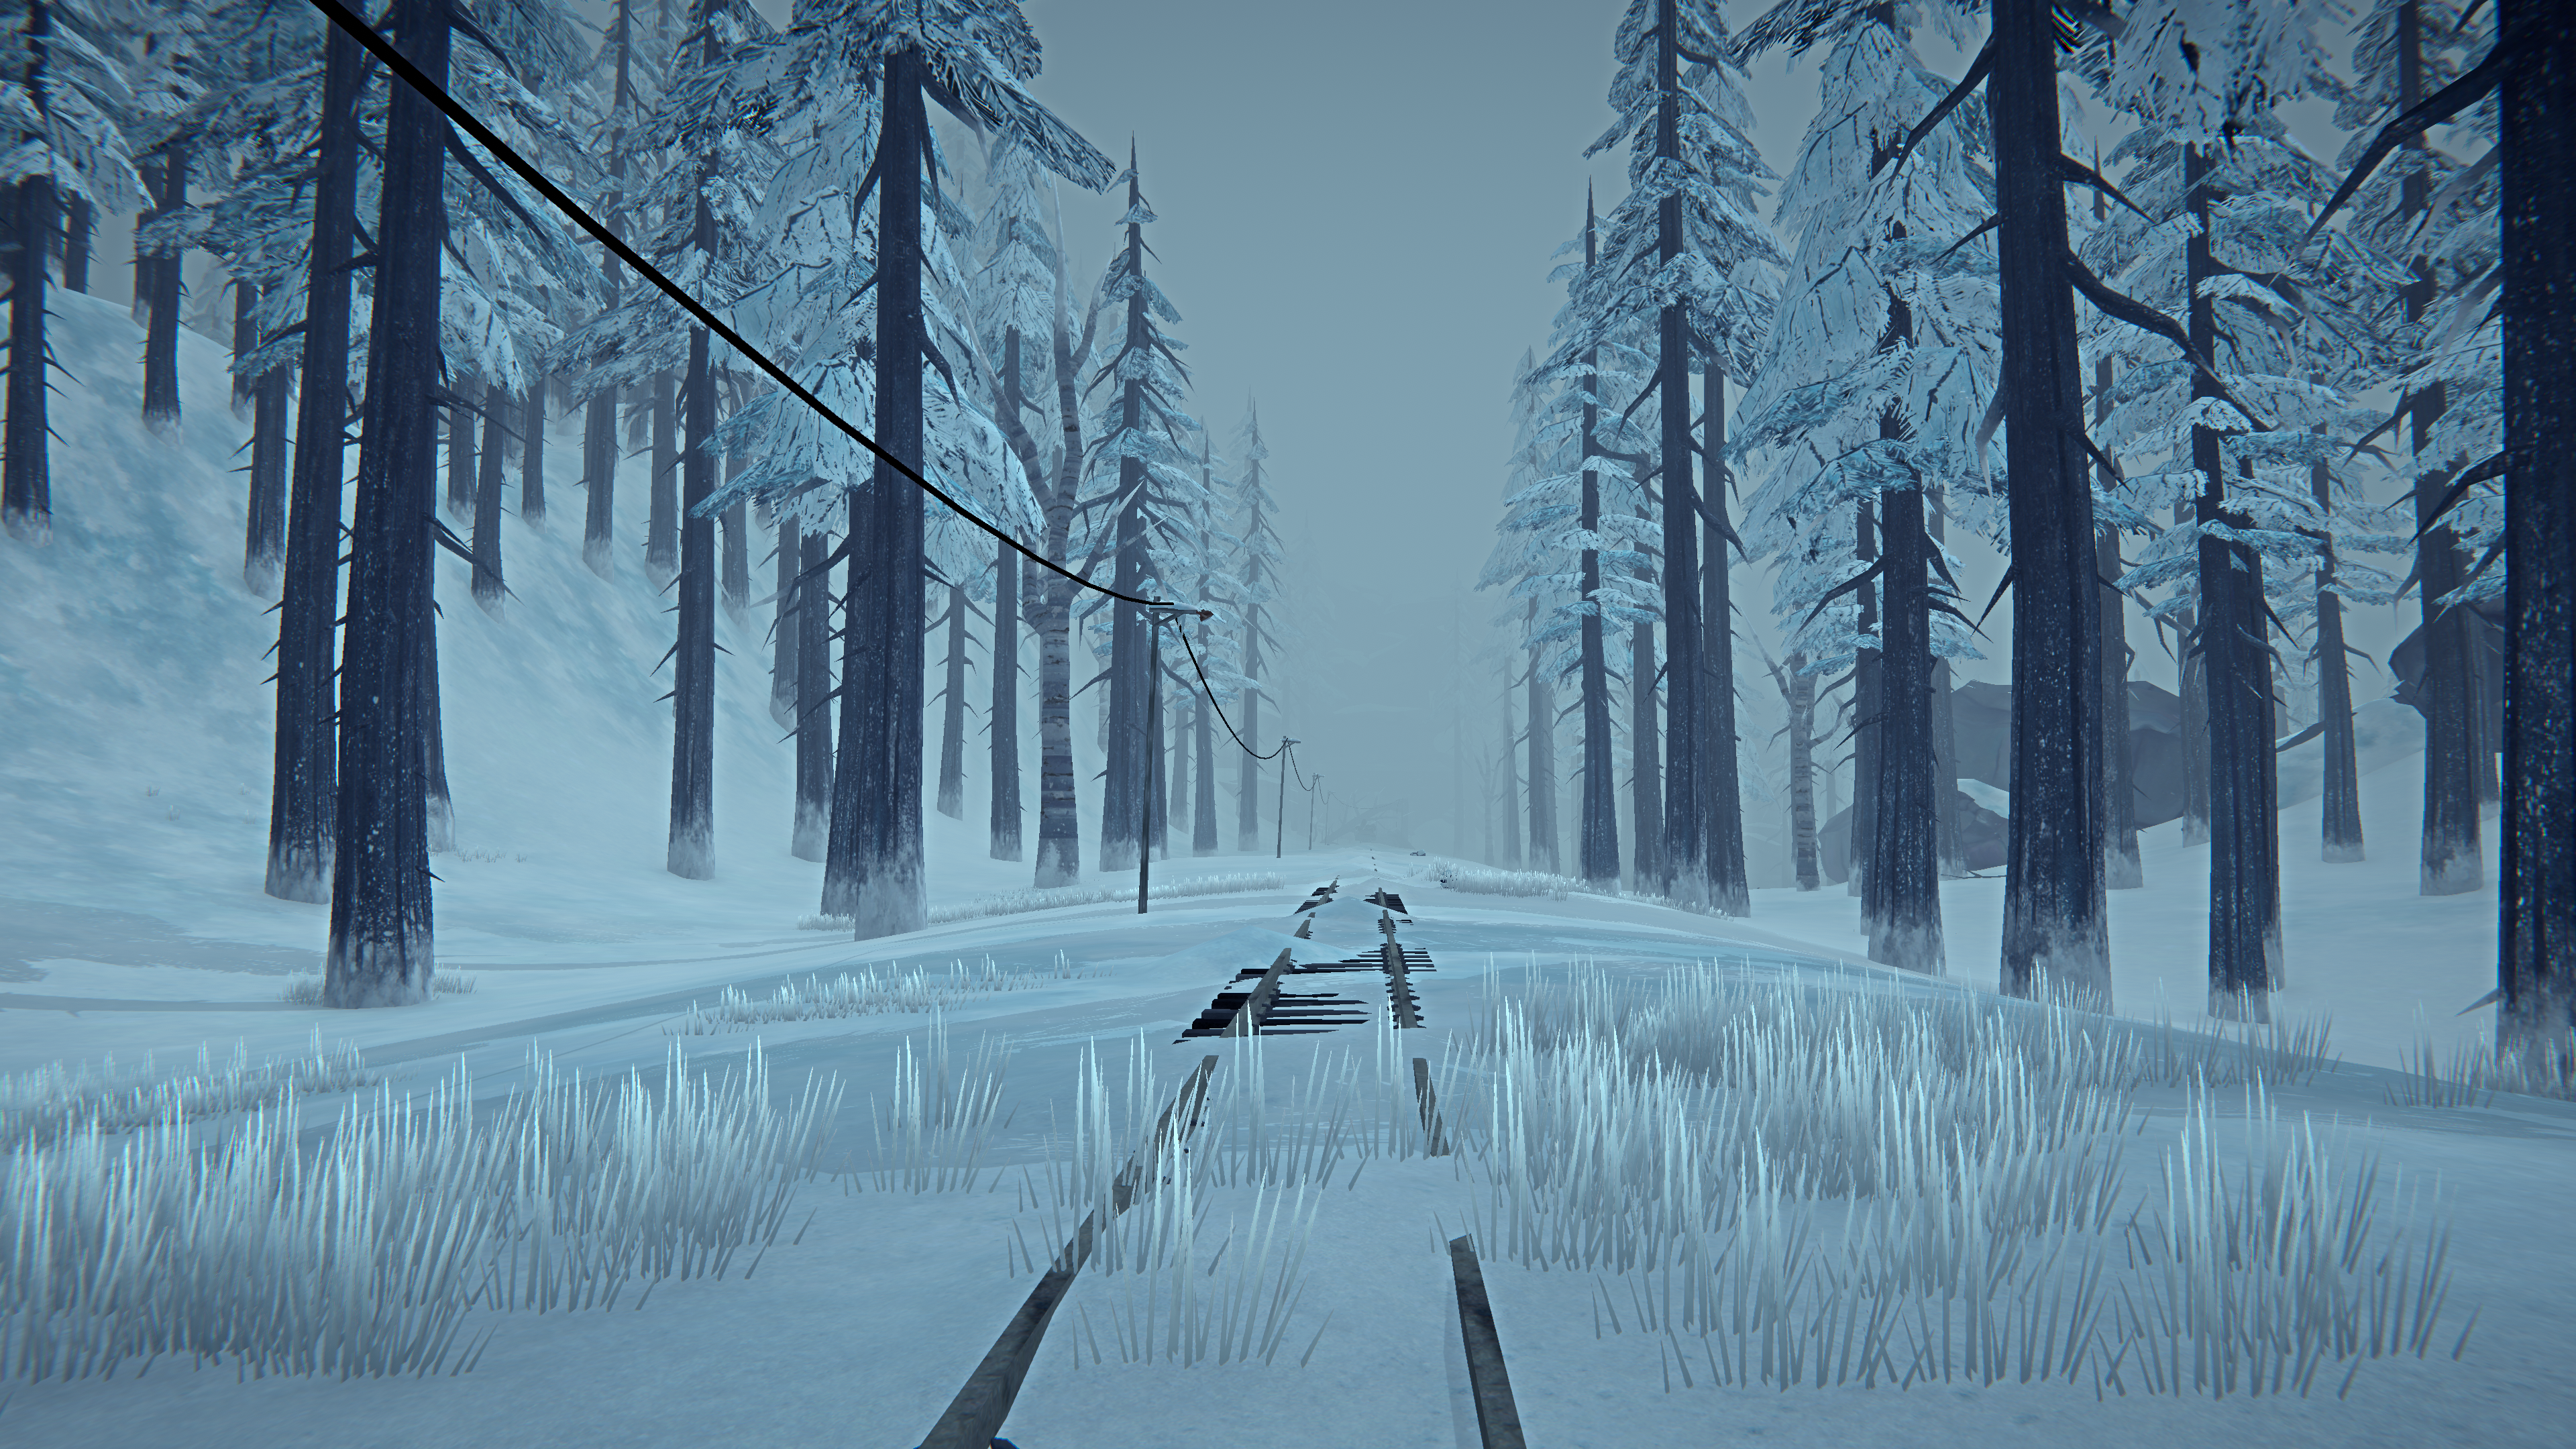 The Long Dark Screen Shot Snow Survival Video Game Landscape PC Gaming Forest Winter Nature Trees Mi 3840x2160